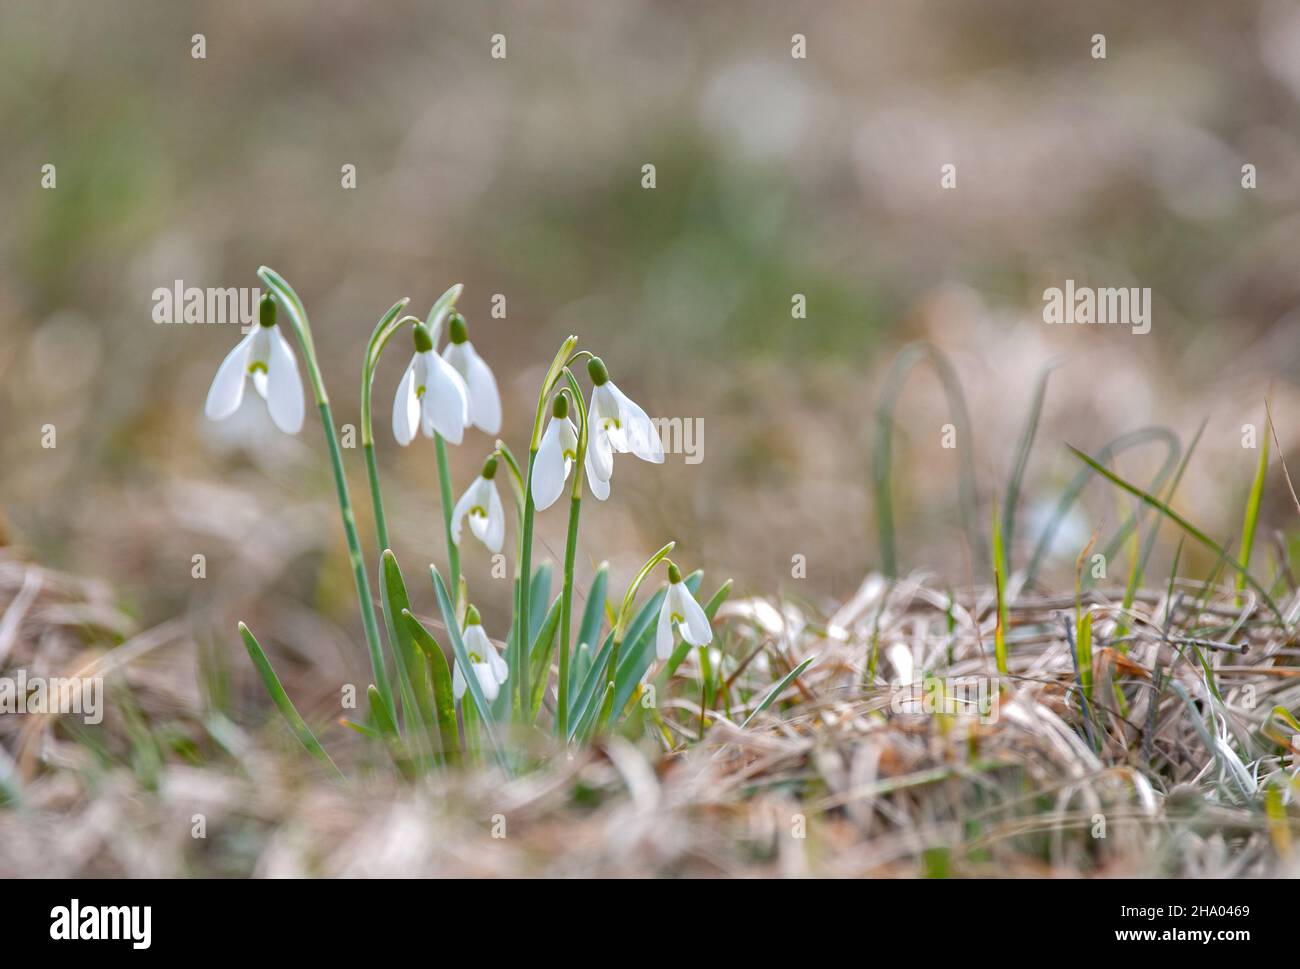 Common snowdrops growing from the ground during springtime season Stock Photo